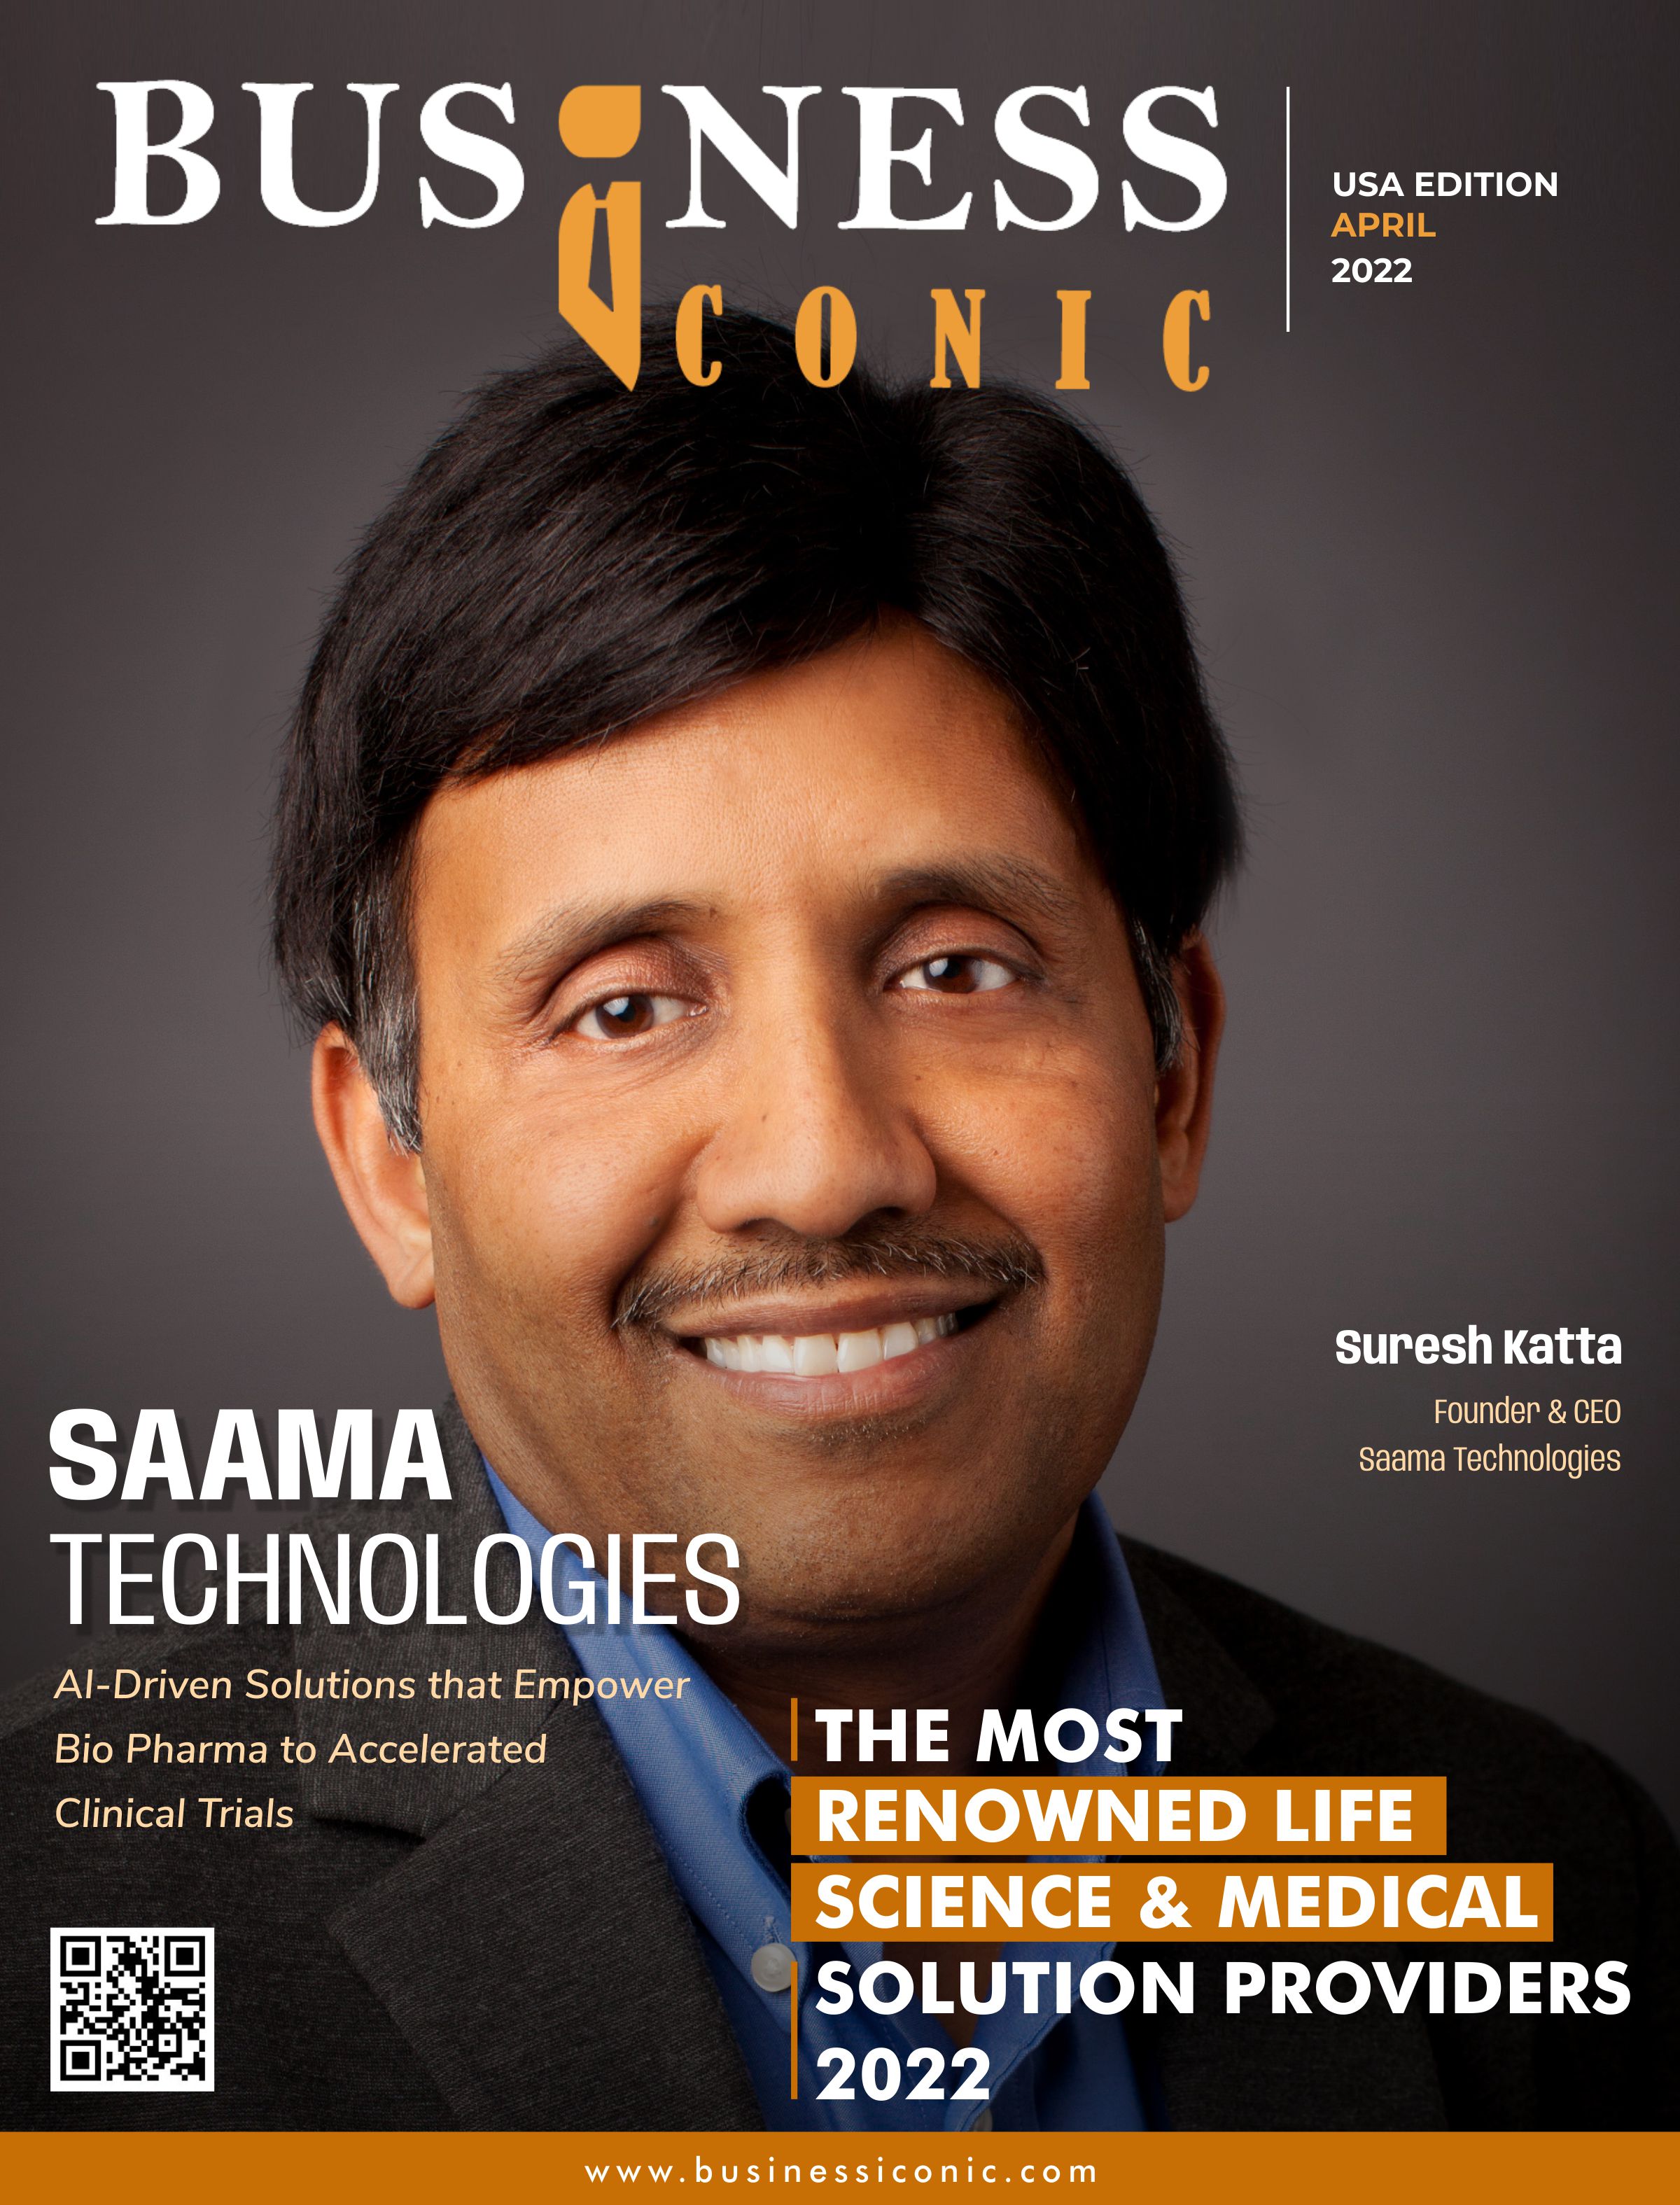 The Renowned Life Science & Medical Solution Providers 2022 | Business Iconic